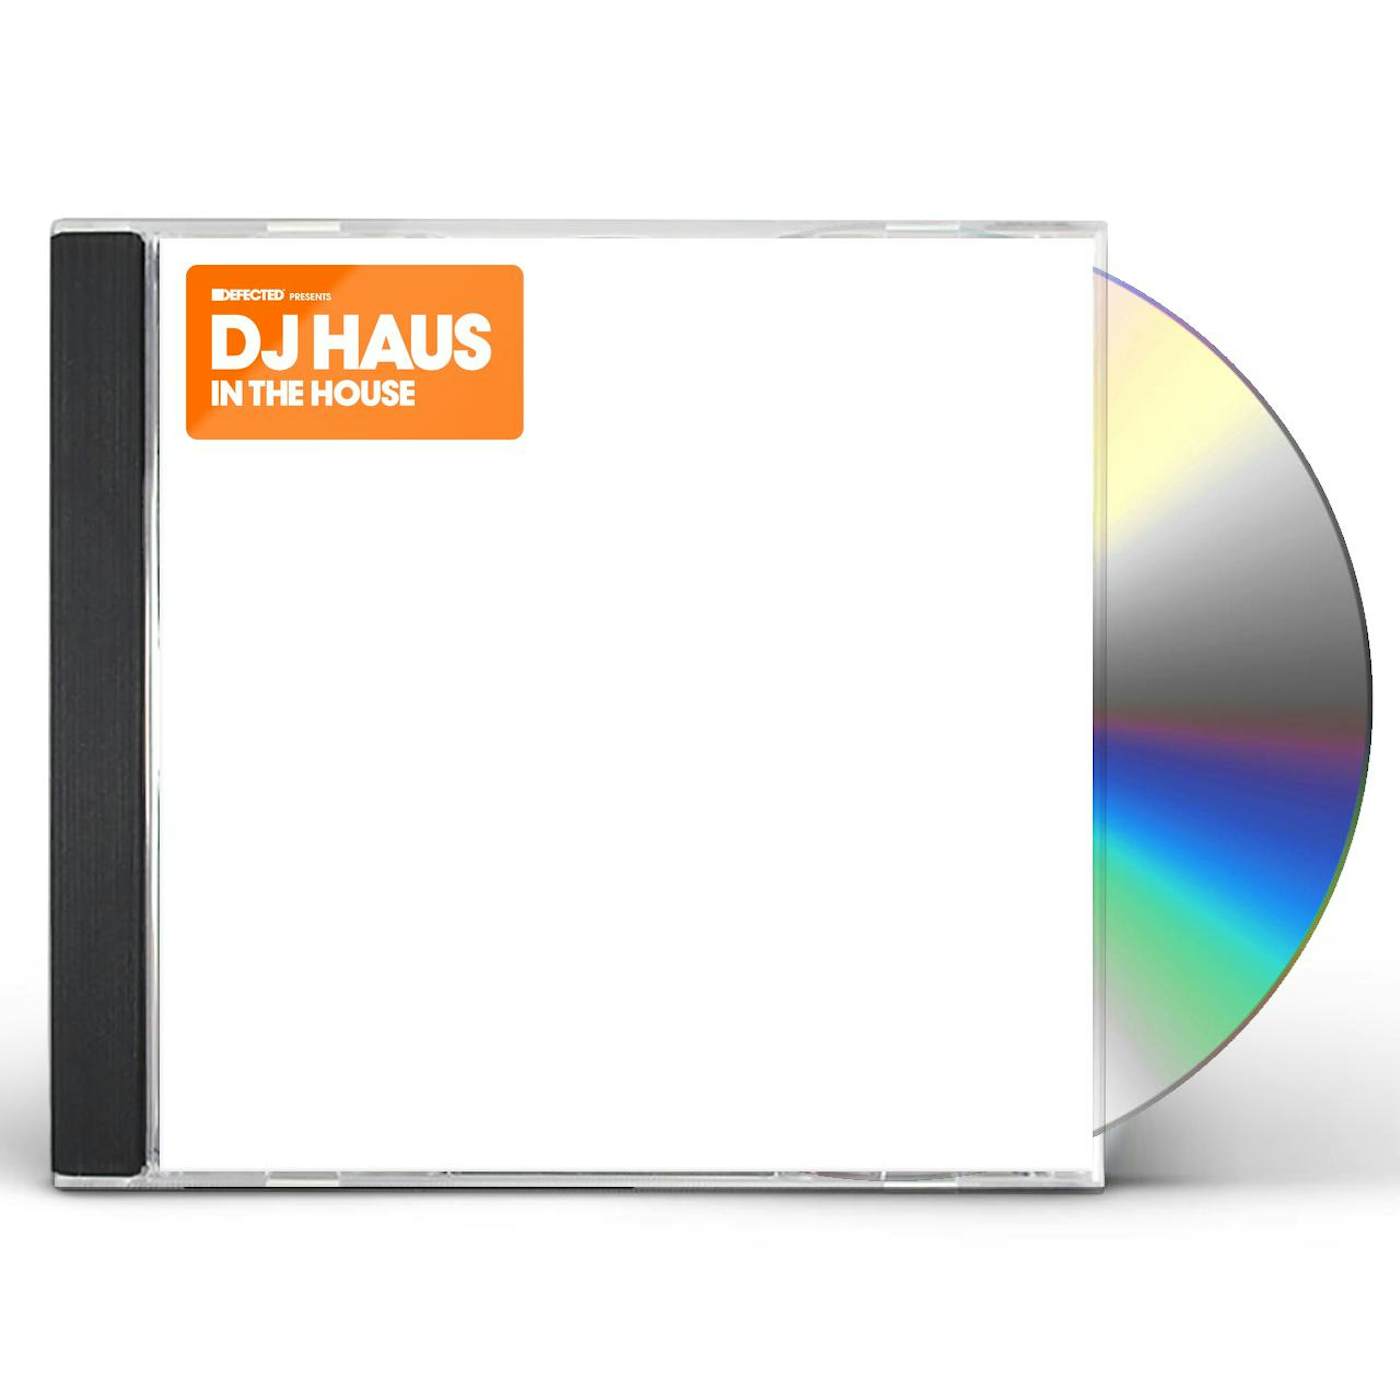 DEFECTED PRESENTS DJ HAUS IN THE HOUSE CD